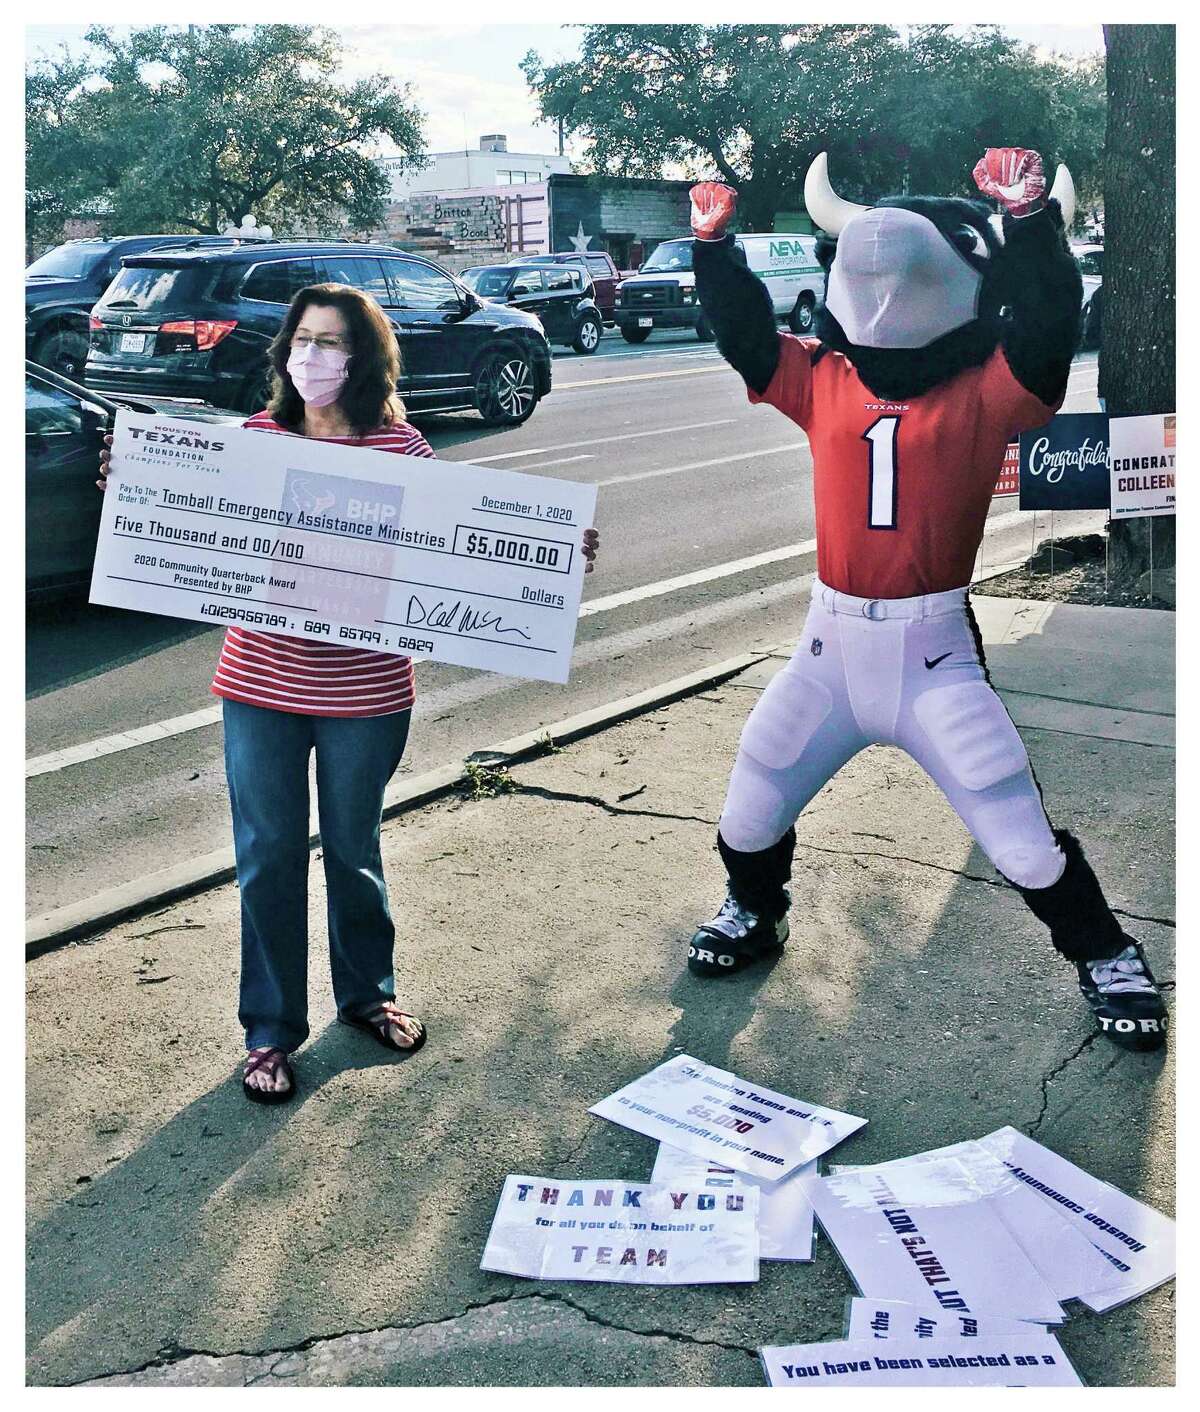 Colleen Chalker, Tomball Emergency Assistance Ministries food pantry manager, is one of nine finalists for the Houston Texans Community Quarterback Awards through United Way.